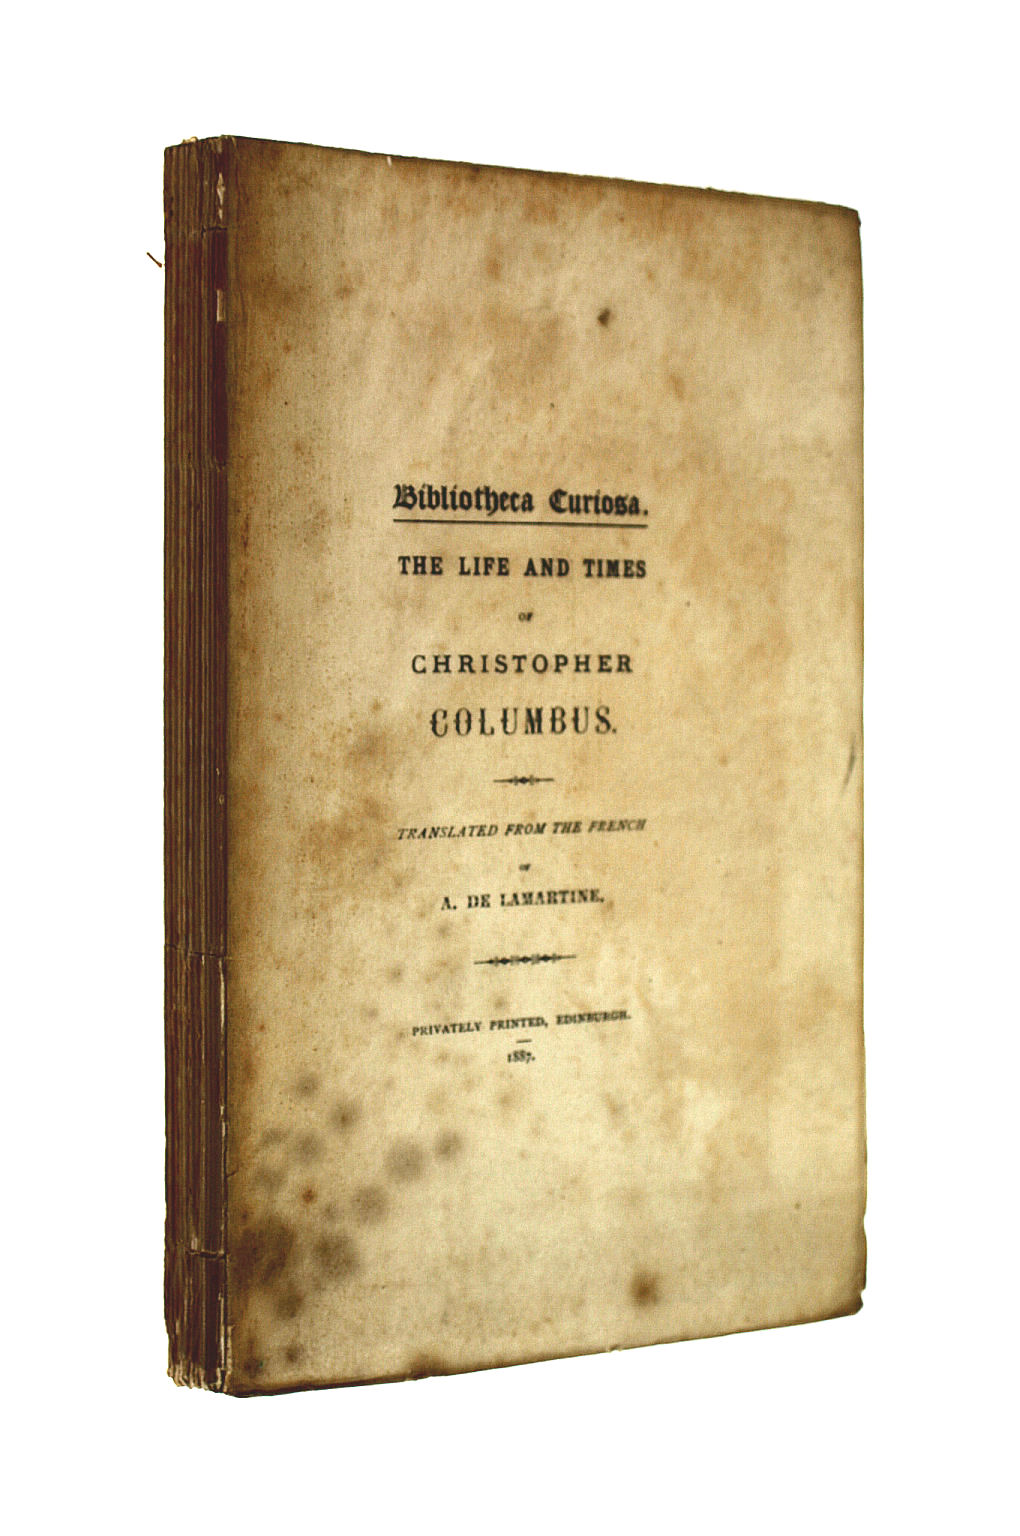 MARIE LOUIS ALPHONSE DE LAMARTINE DE PRAT; CRISTOFORO COLOMBO; EDMUND MARSDEN GOLDSMID - The Life and Times of Christopher Columbus. Translated from the French of a. De Lamartine (Bibliotheca curiosa.)